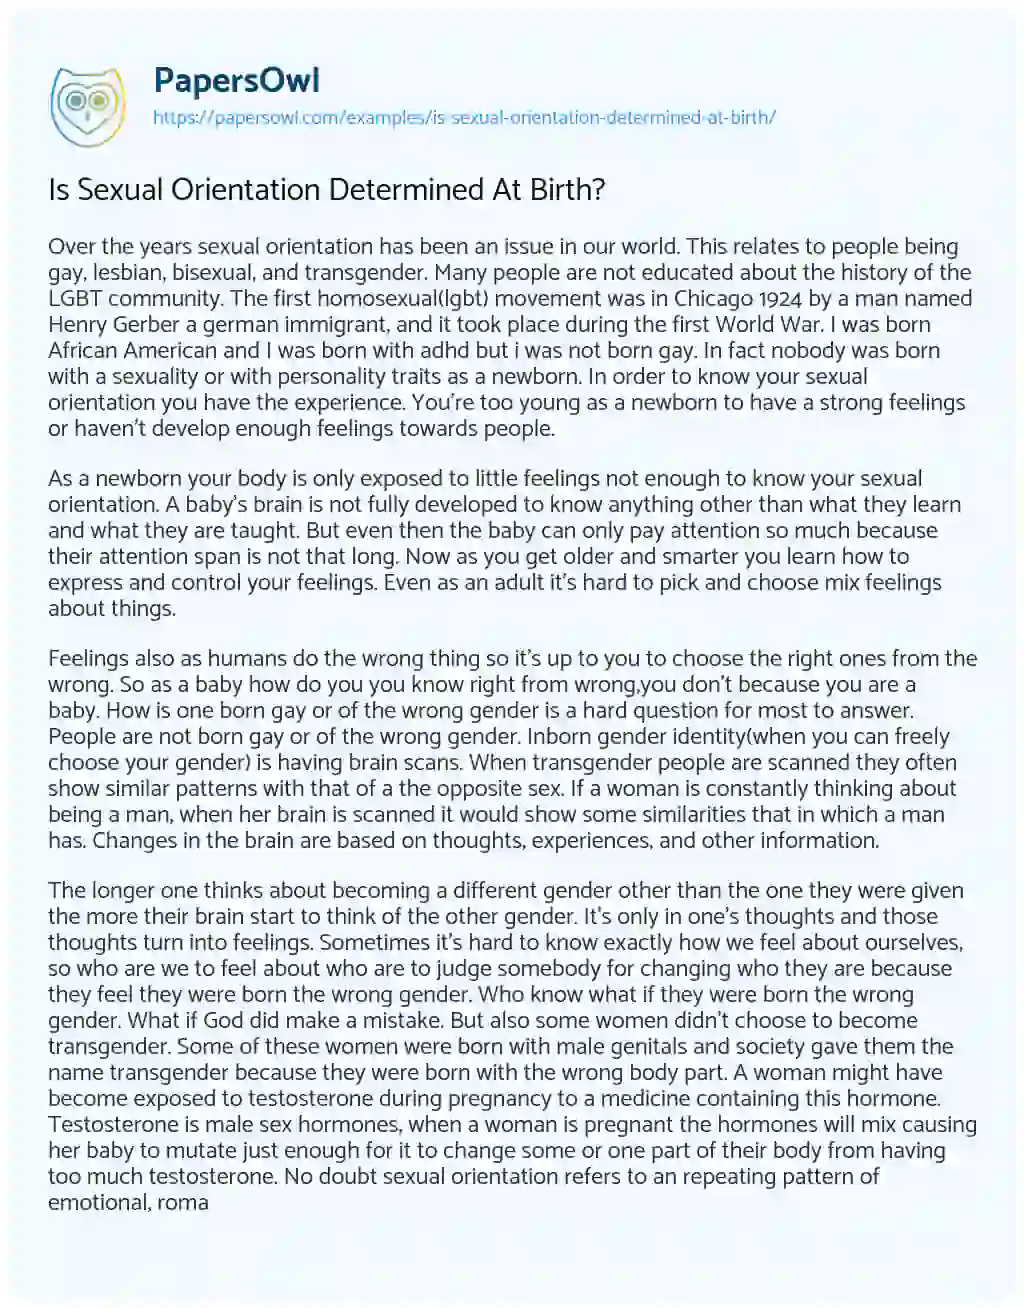 Is Sexual Orientation Determined at Birth? essay